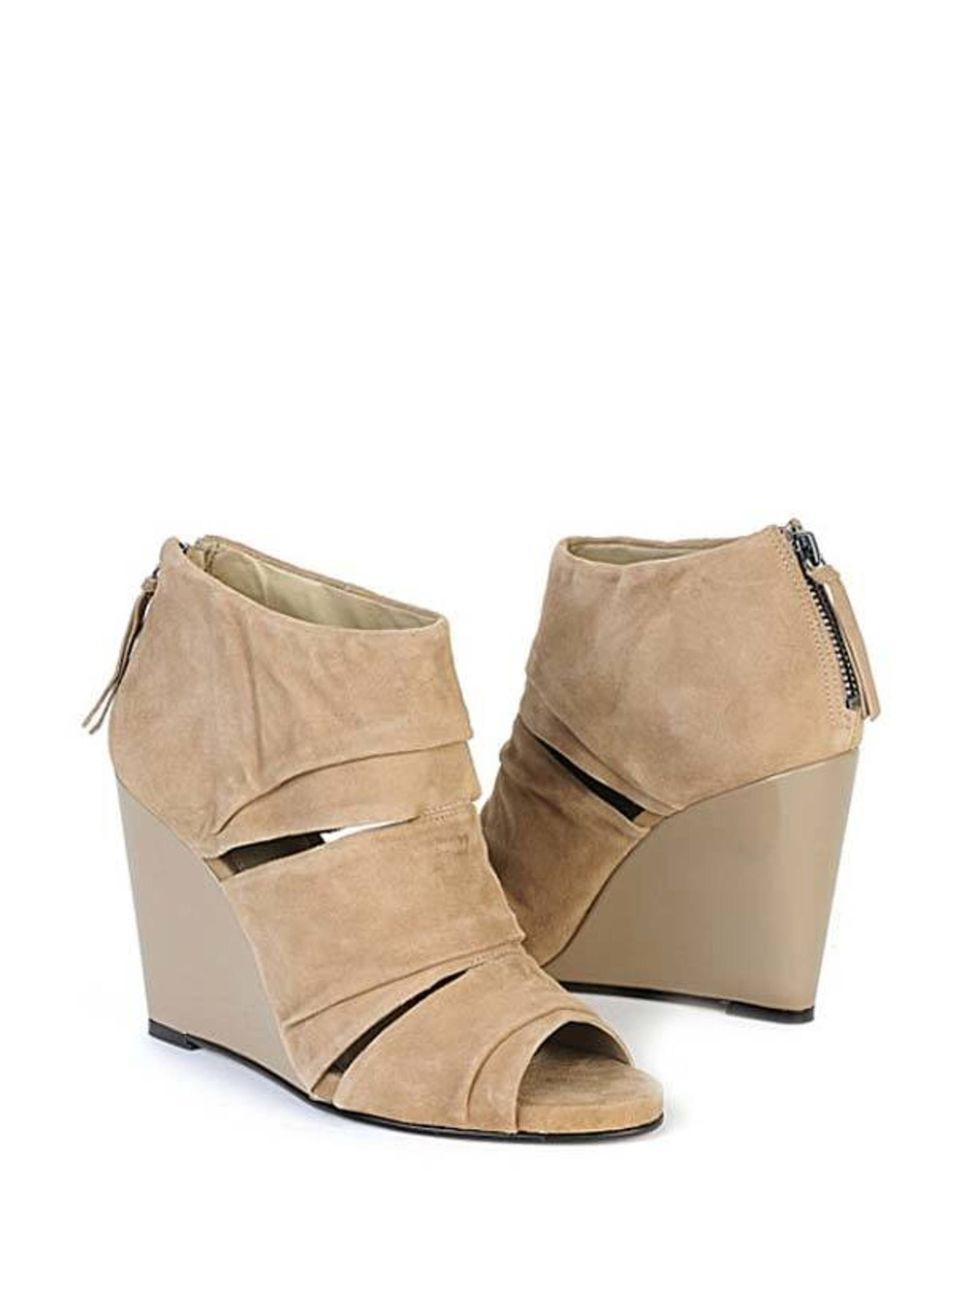 <p>Carvela taupe wedge boots, £140, at <a href="http://www.selfridges.com/en/Accessories/Asterix-ankle-boots-taupe_854-10004-1770447239/">Selfridges</a> </p>